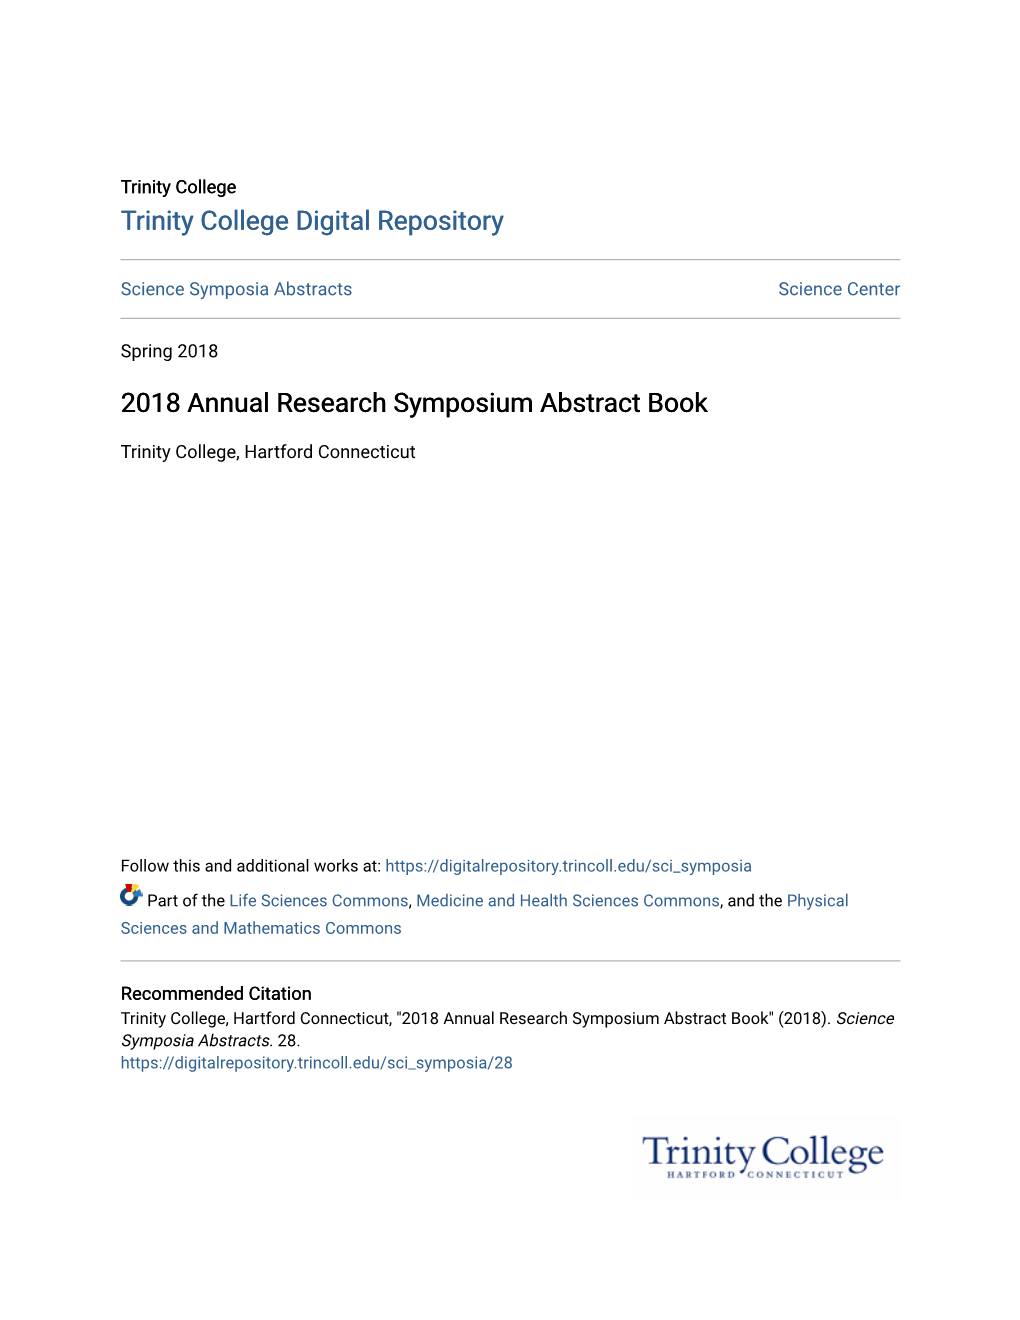 2018 Annual Research Symposium Abstract Book